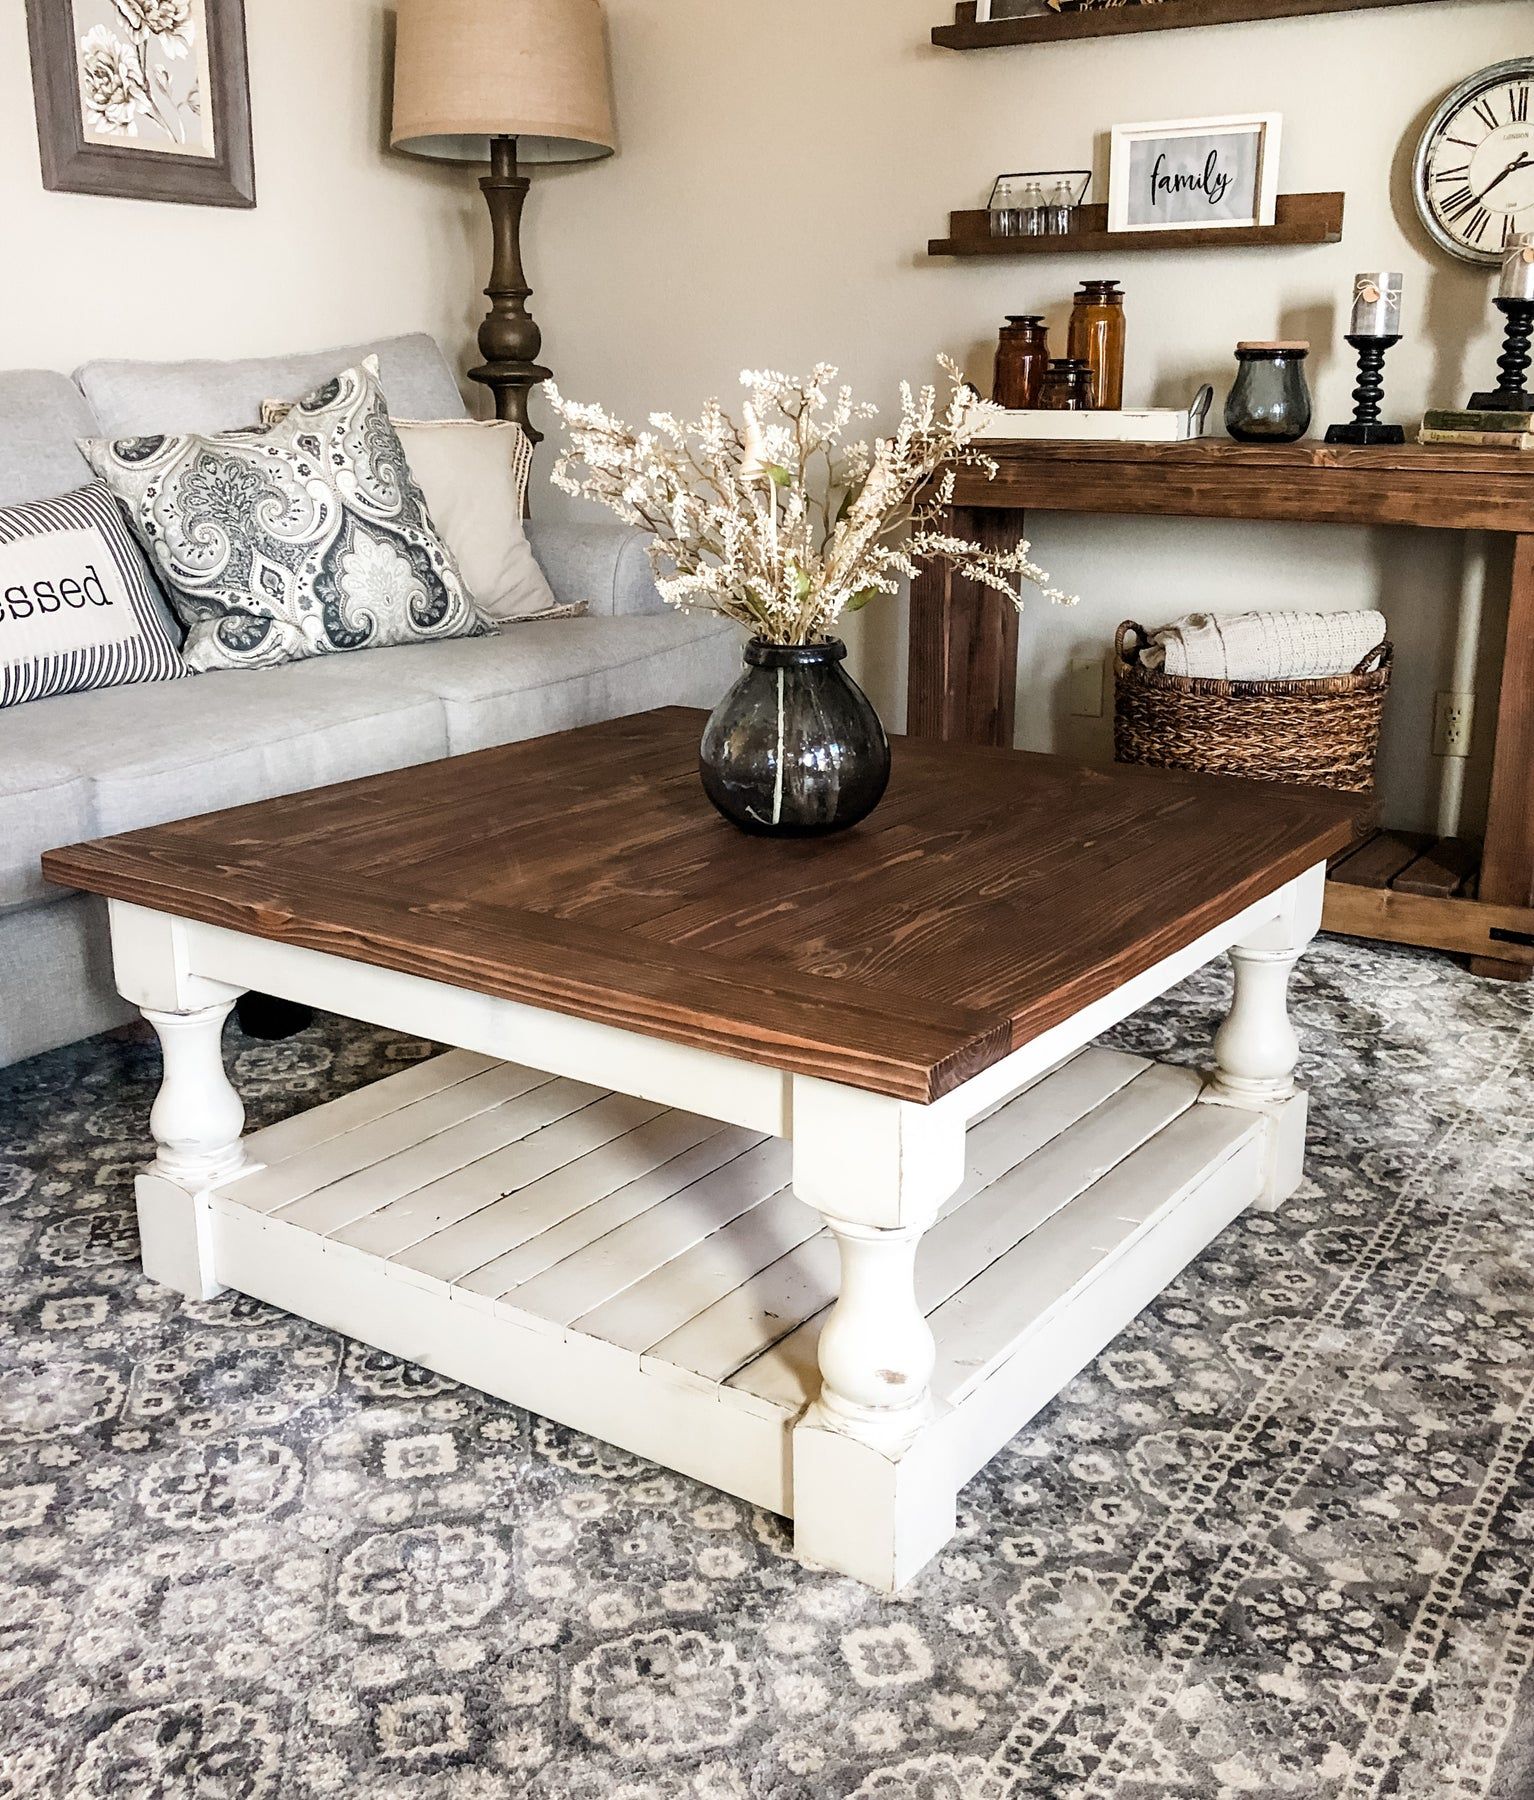 Rustic Baluster Farmhouse Coffee Table (prov Square) – The Love Made Home Inside Rustic Coffee Tables (Gallery 4 of 20)